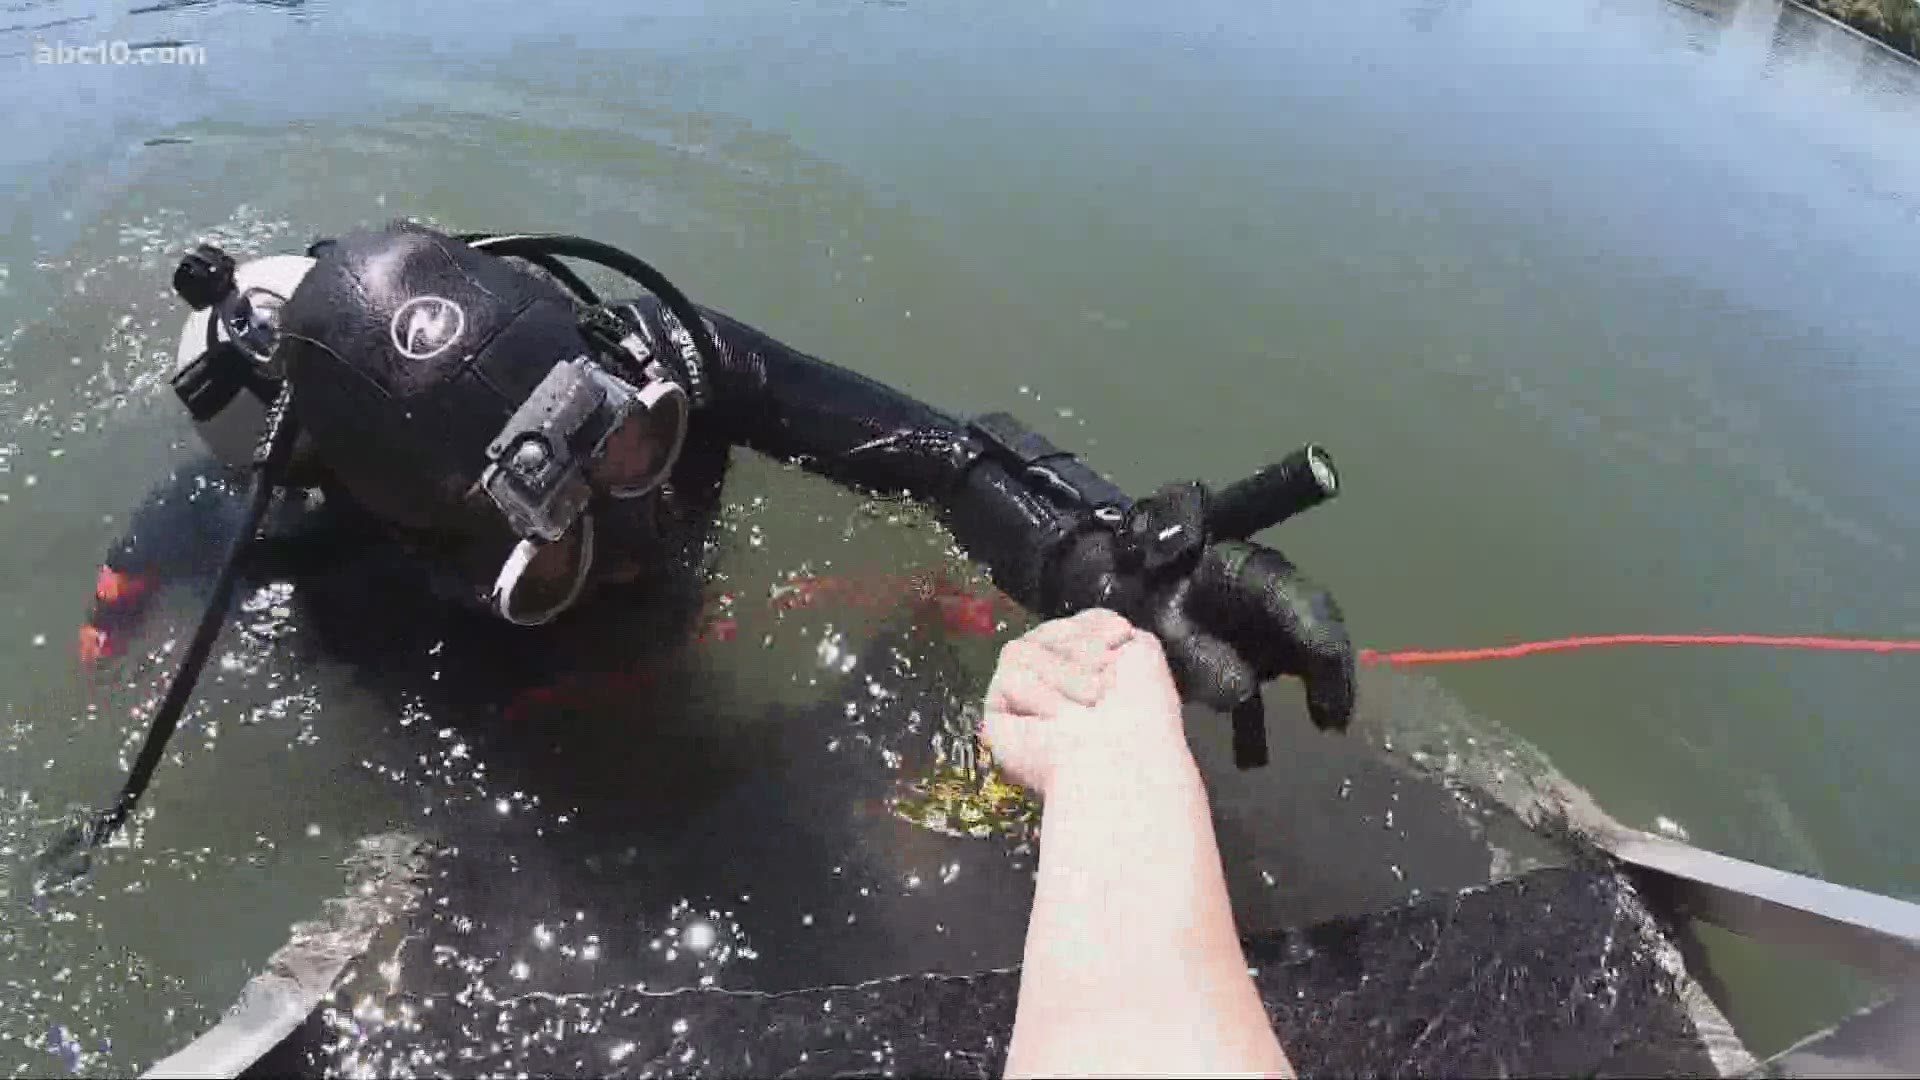 Sacramento's resident "merman" made a big save, reuniting a $17,000 ring that was lost in the river with its owner.